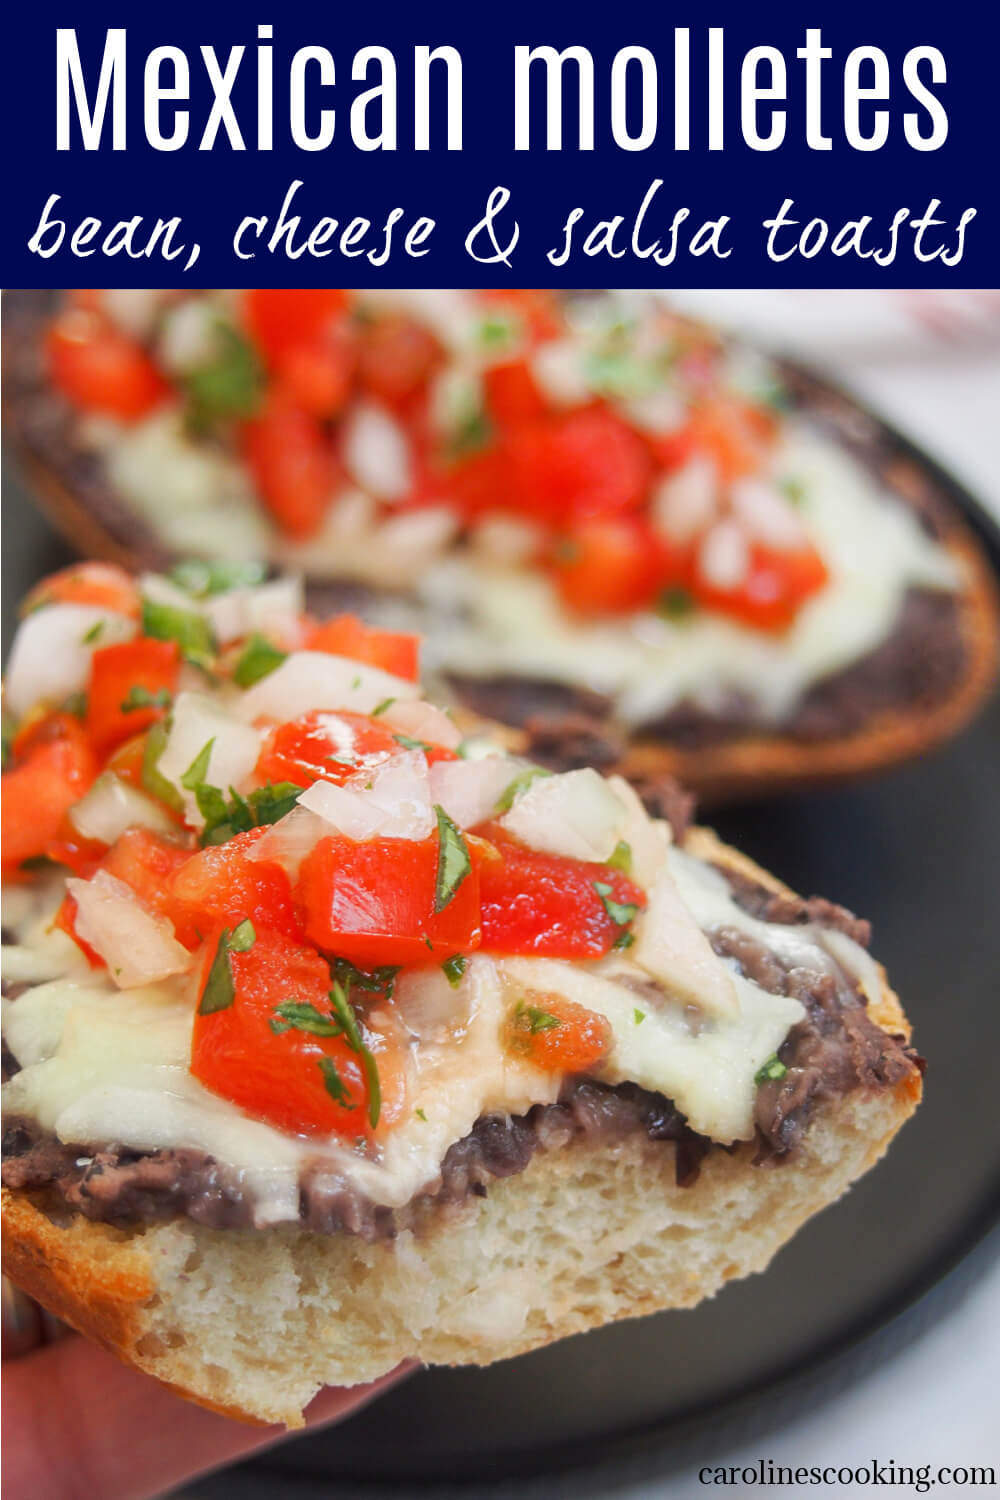 Breakfast (or any meal, to be honest) can hardly get more comforting than this easy and delicious Mexican creation.  Molletes loads cheese, beans and salsa fresca (pico de gallo) on bread and is as tasty as it sounds.  #mexicanbreakfast #vegetarianbreakfast 